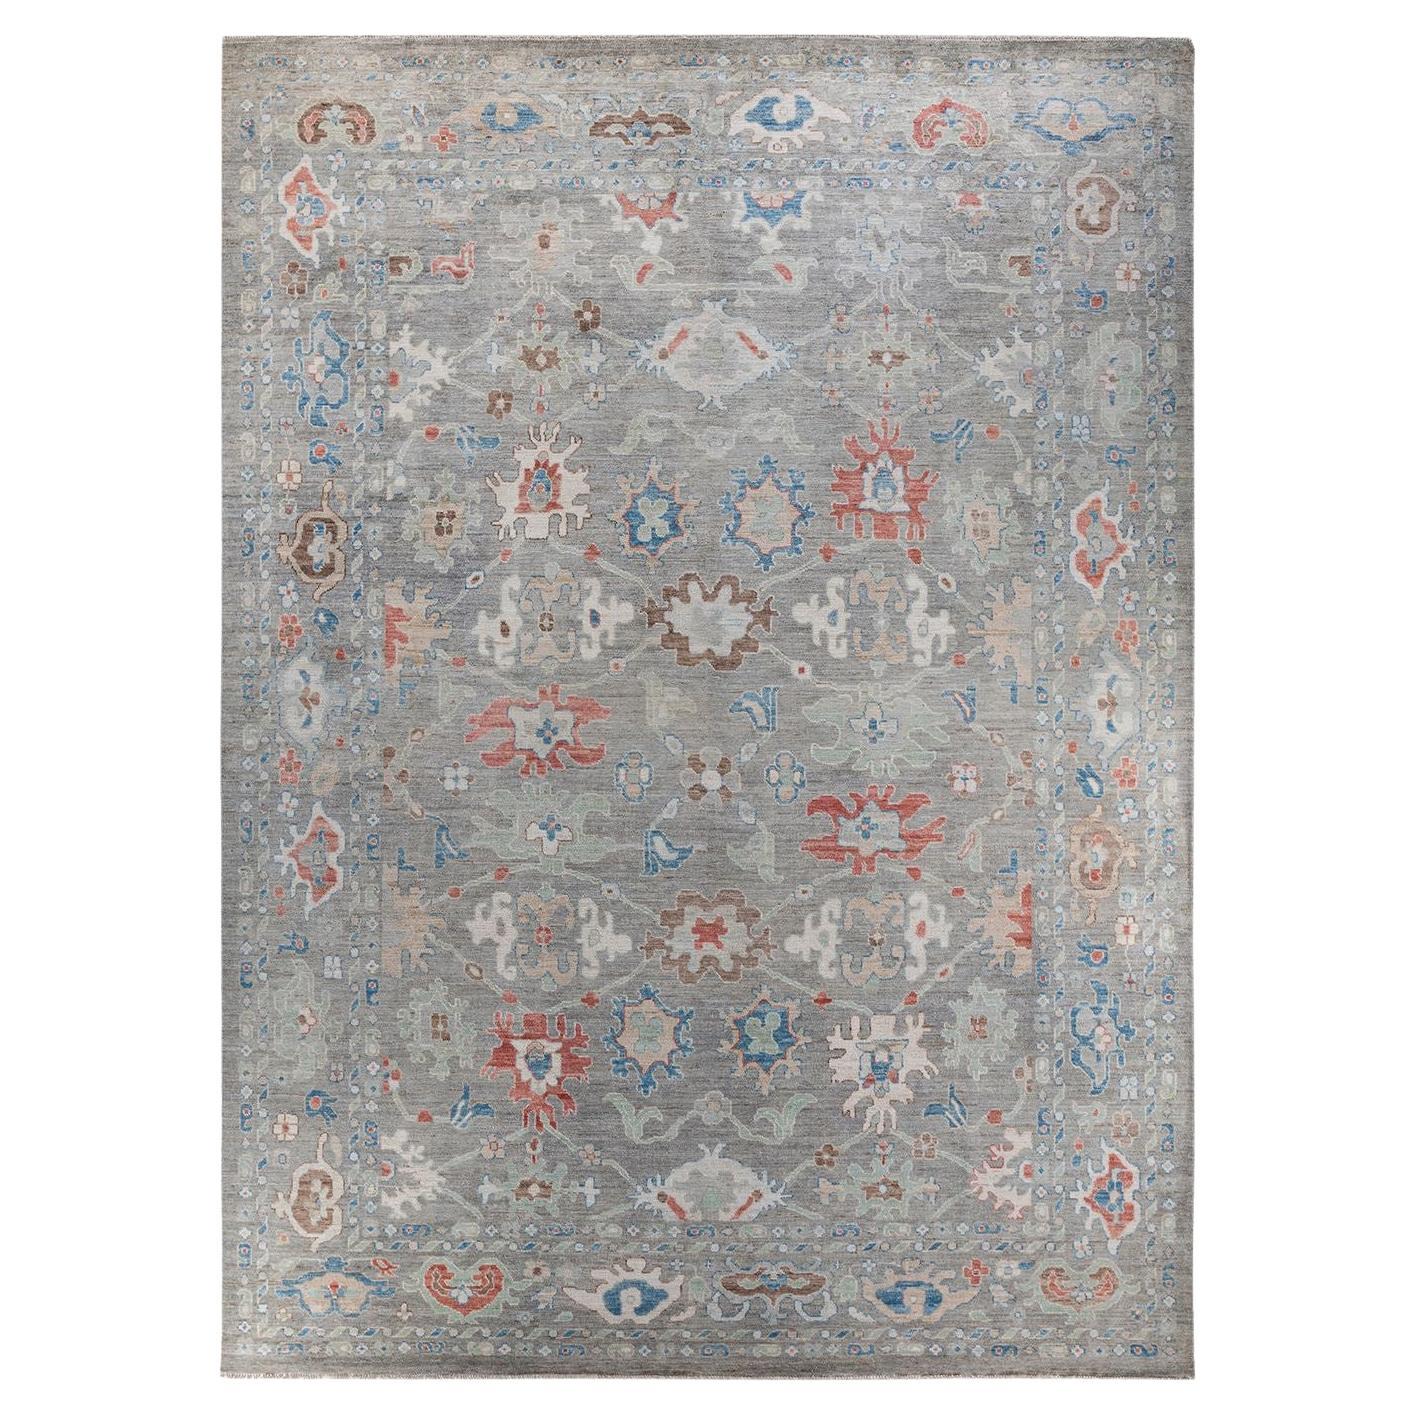 Oushak, One-of-a-Kind Hand Knotted Runner Rug, Gray